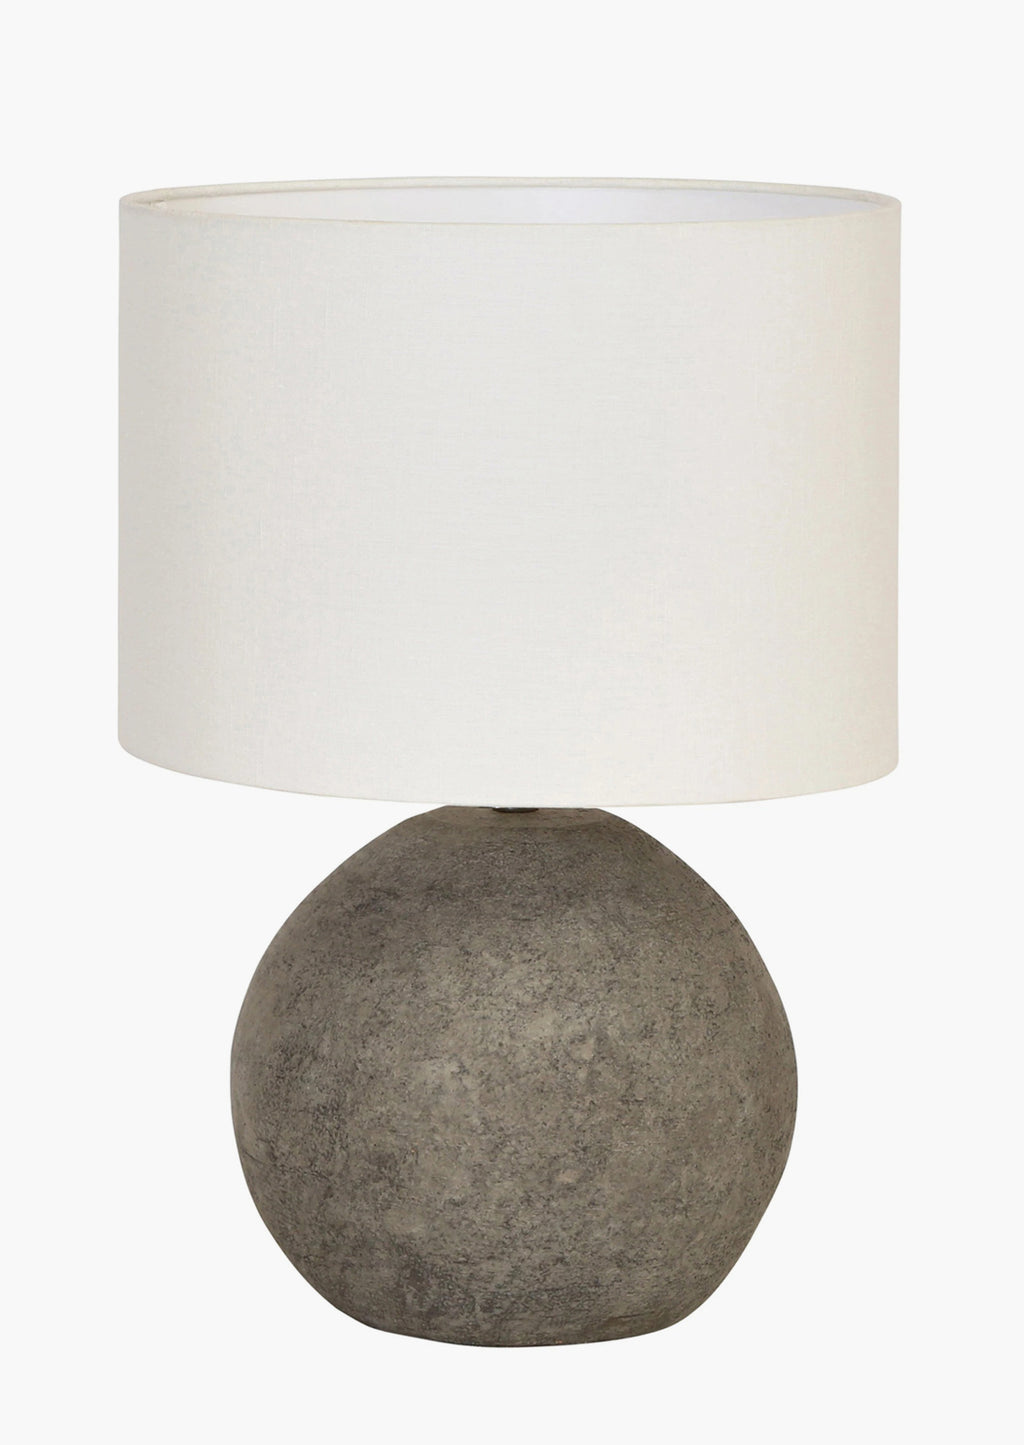 2: A table lamp with round black terracotta base and white cylinder shade.